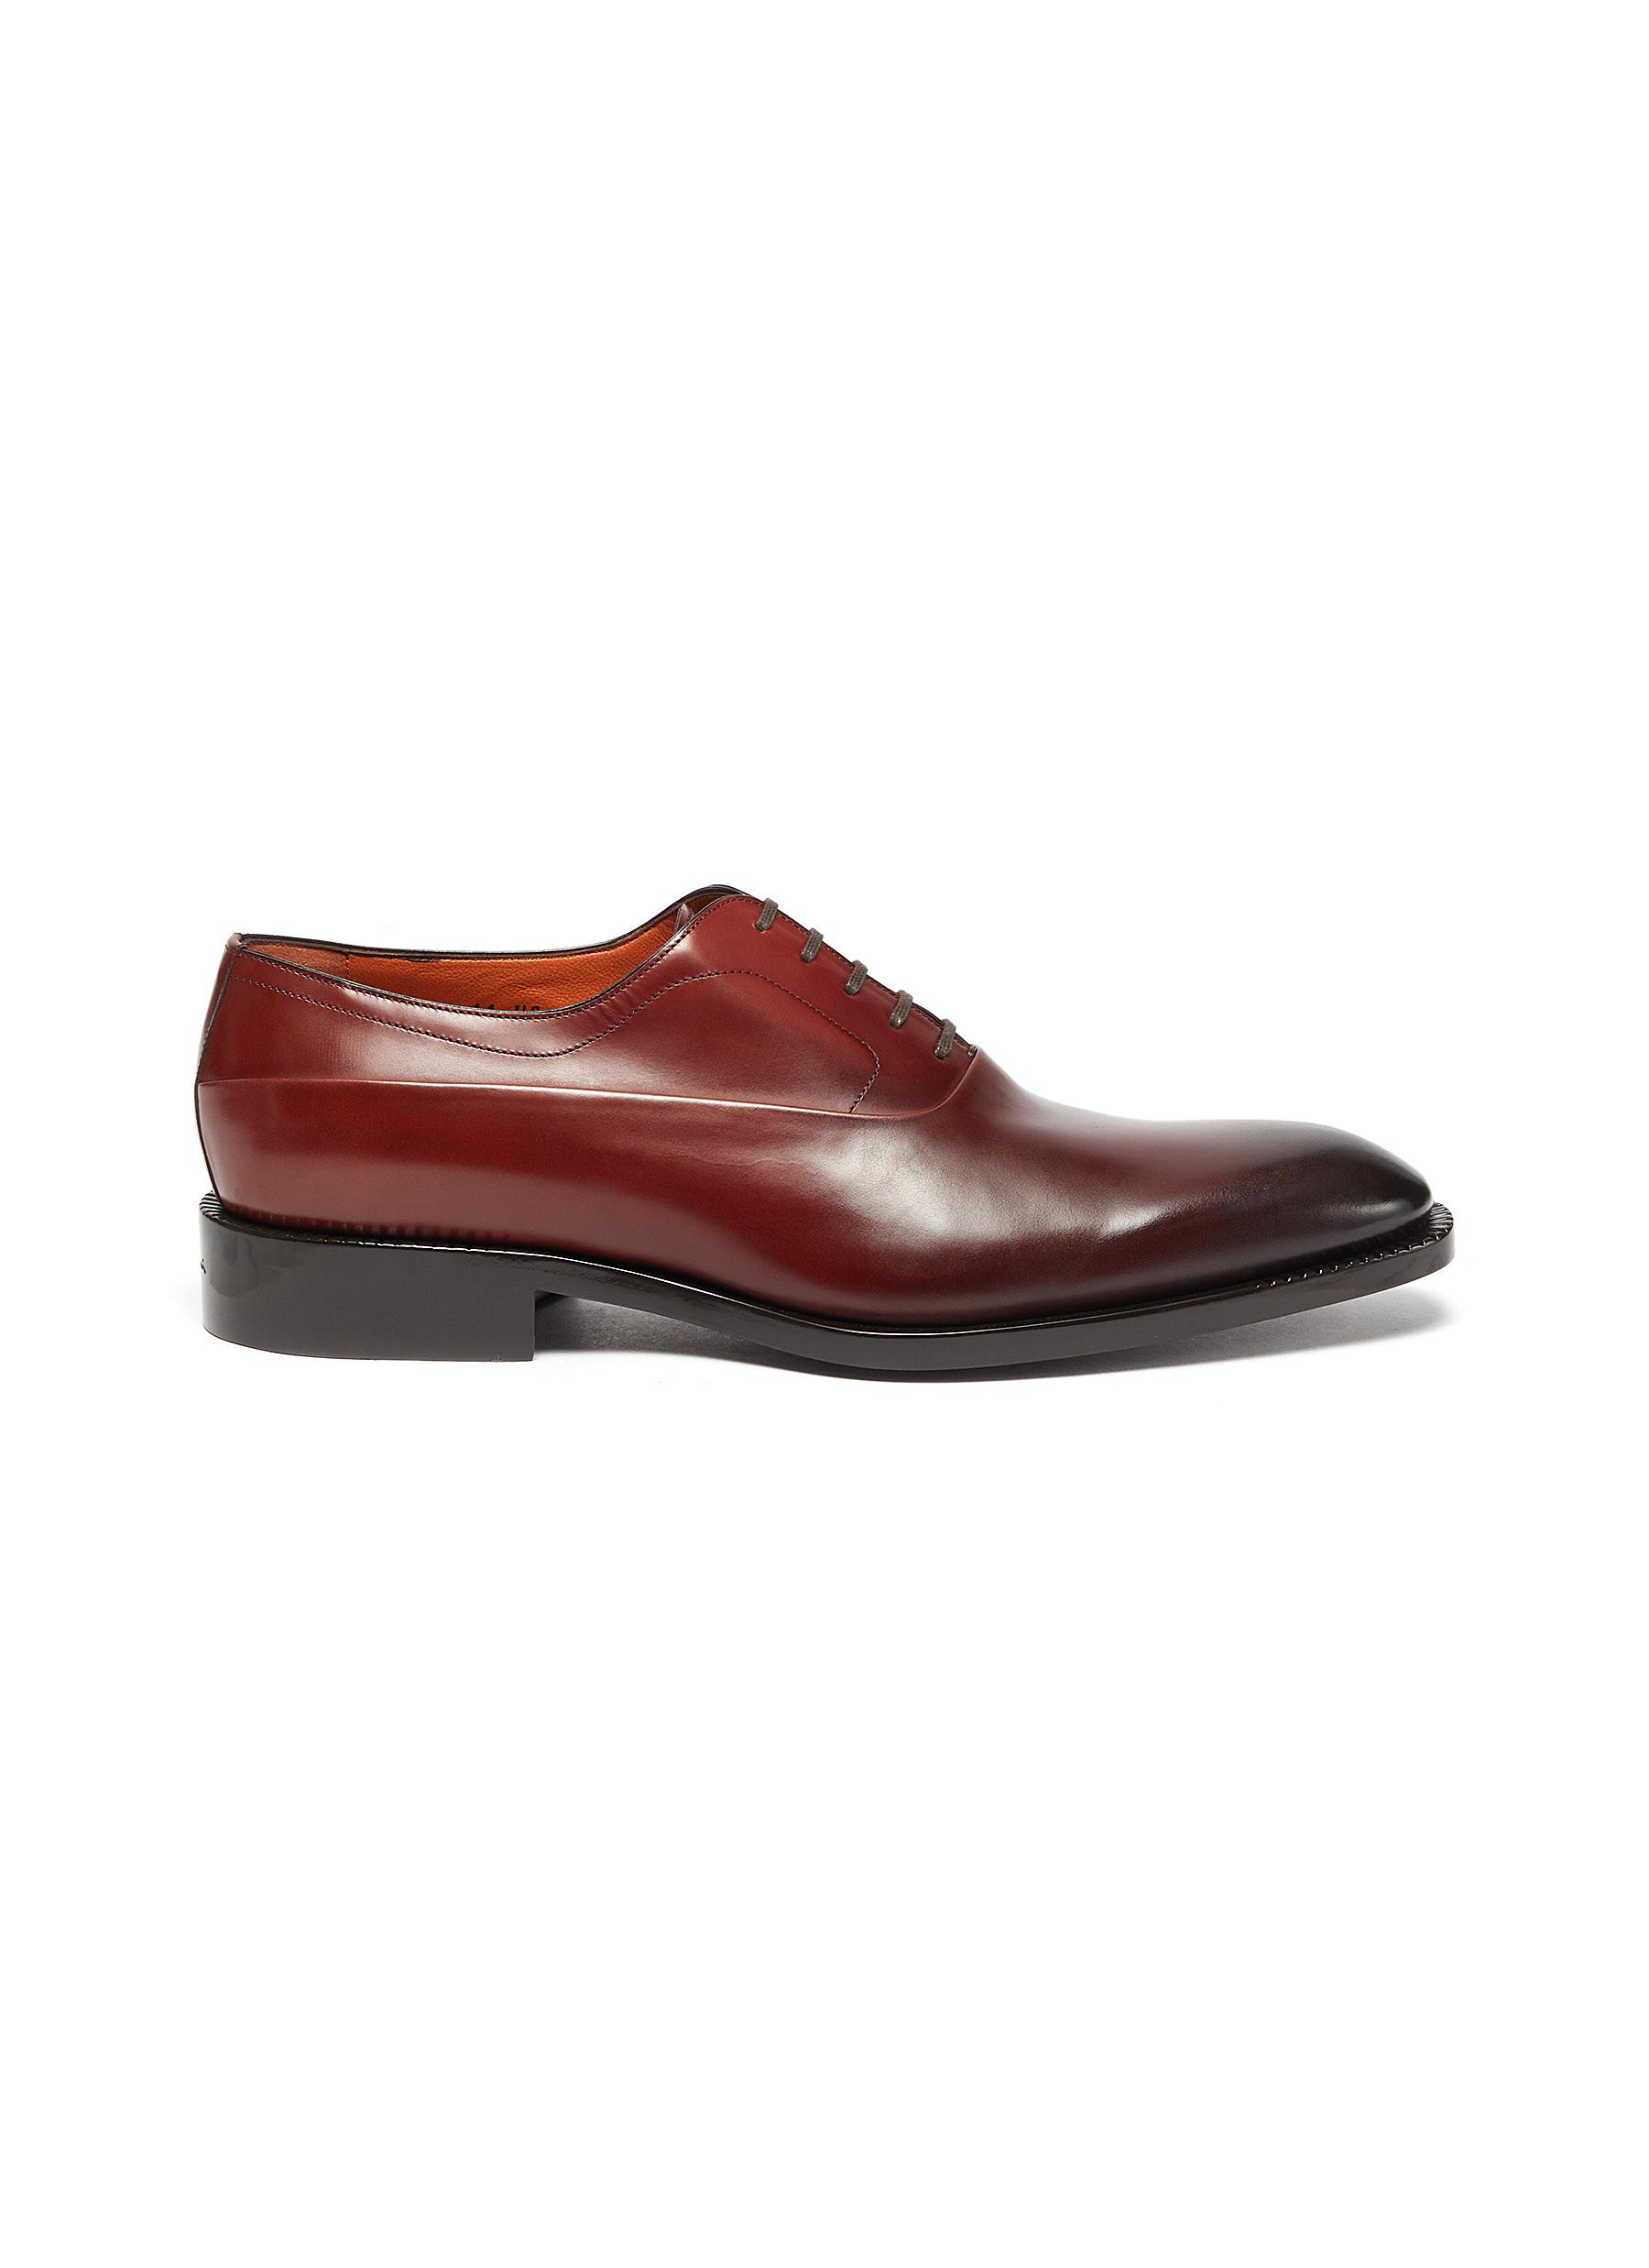 Gradient Leather Oxford Shoes